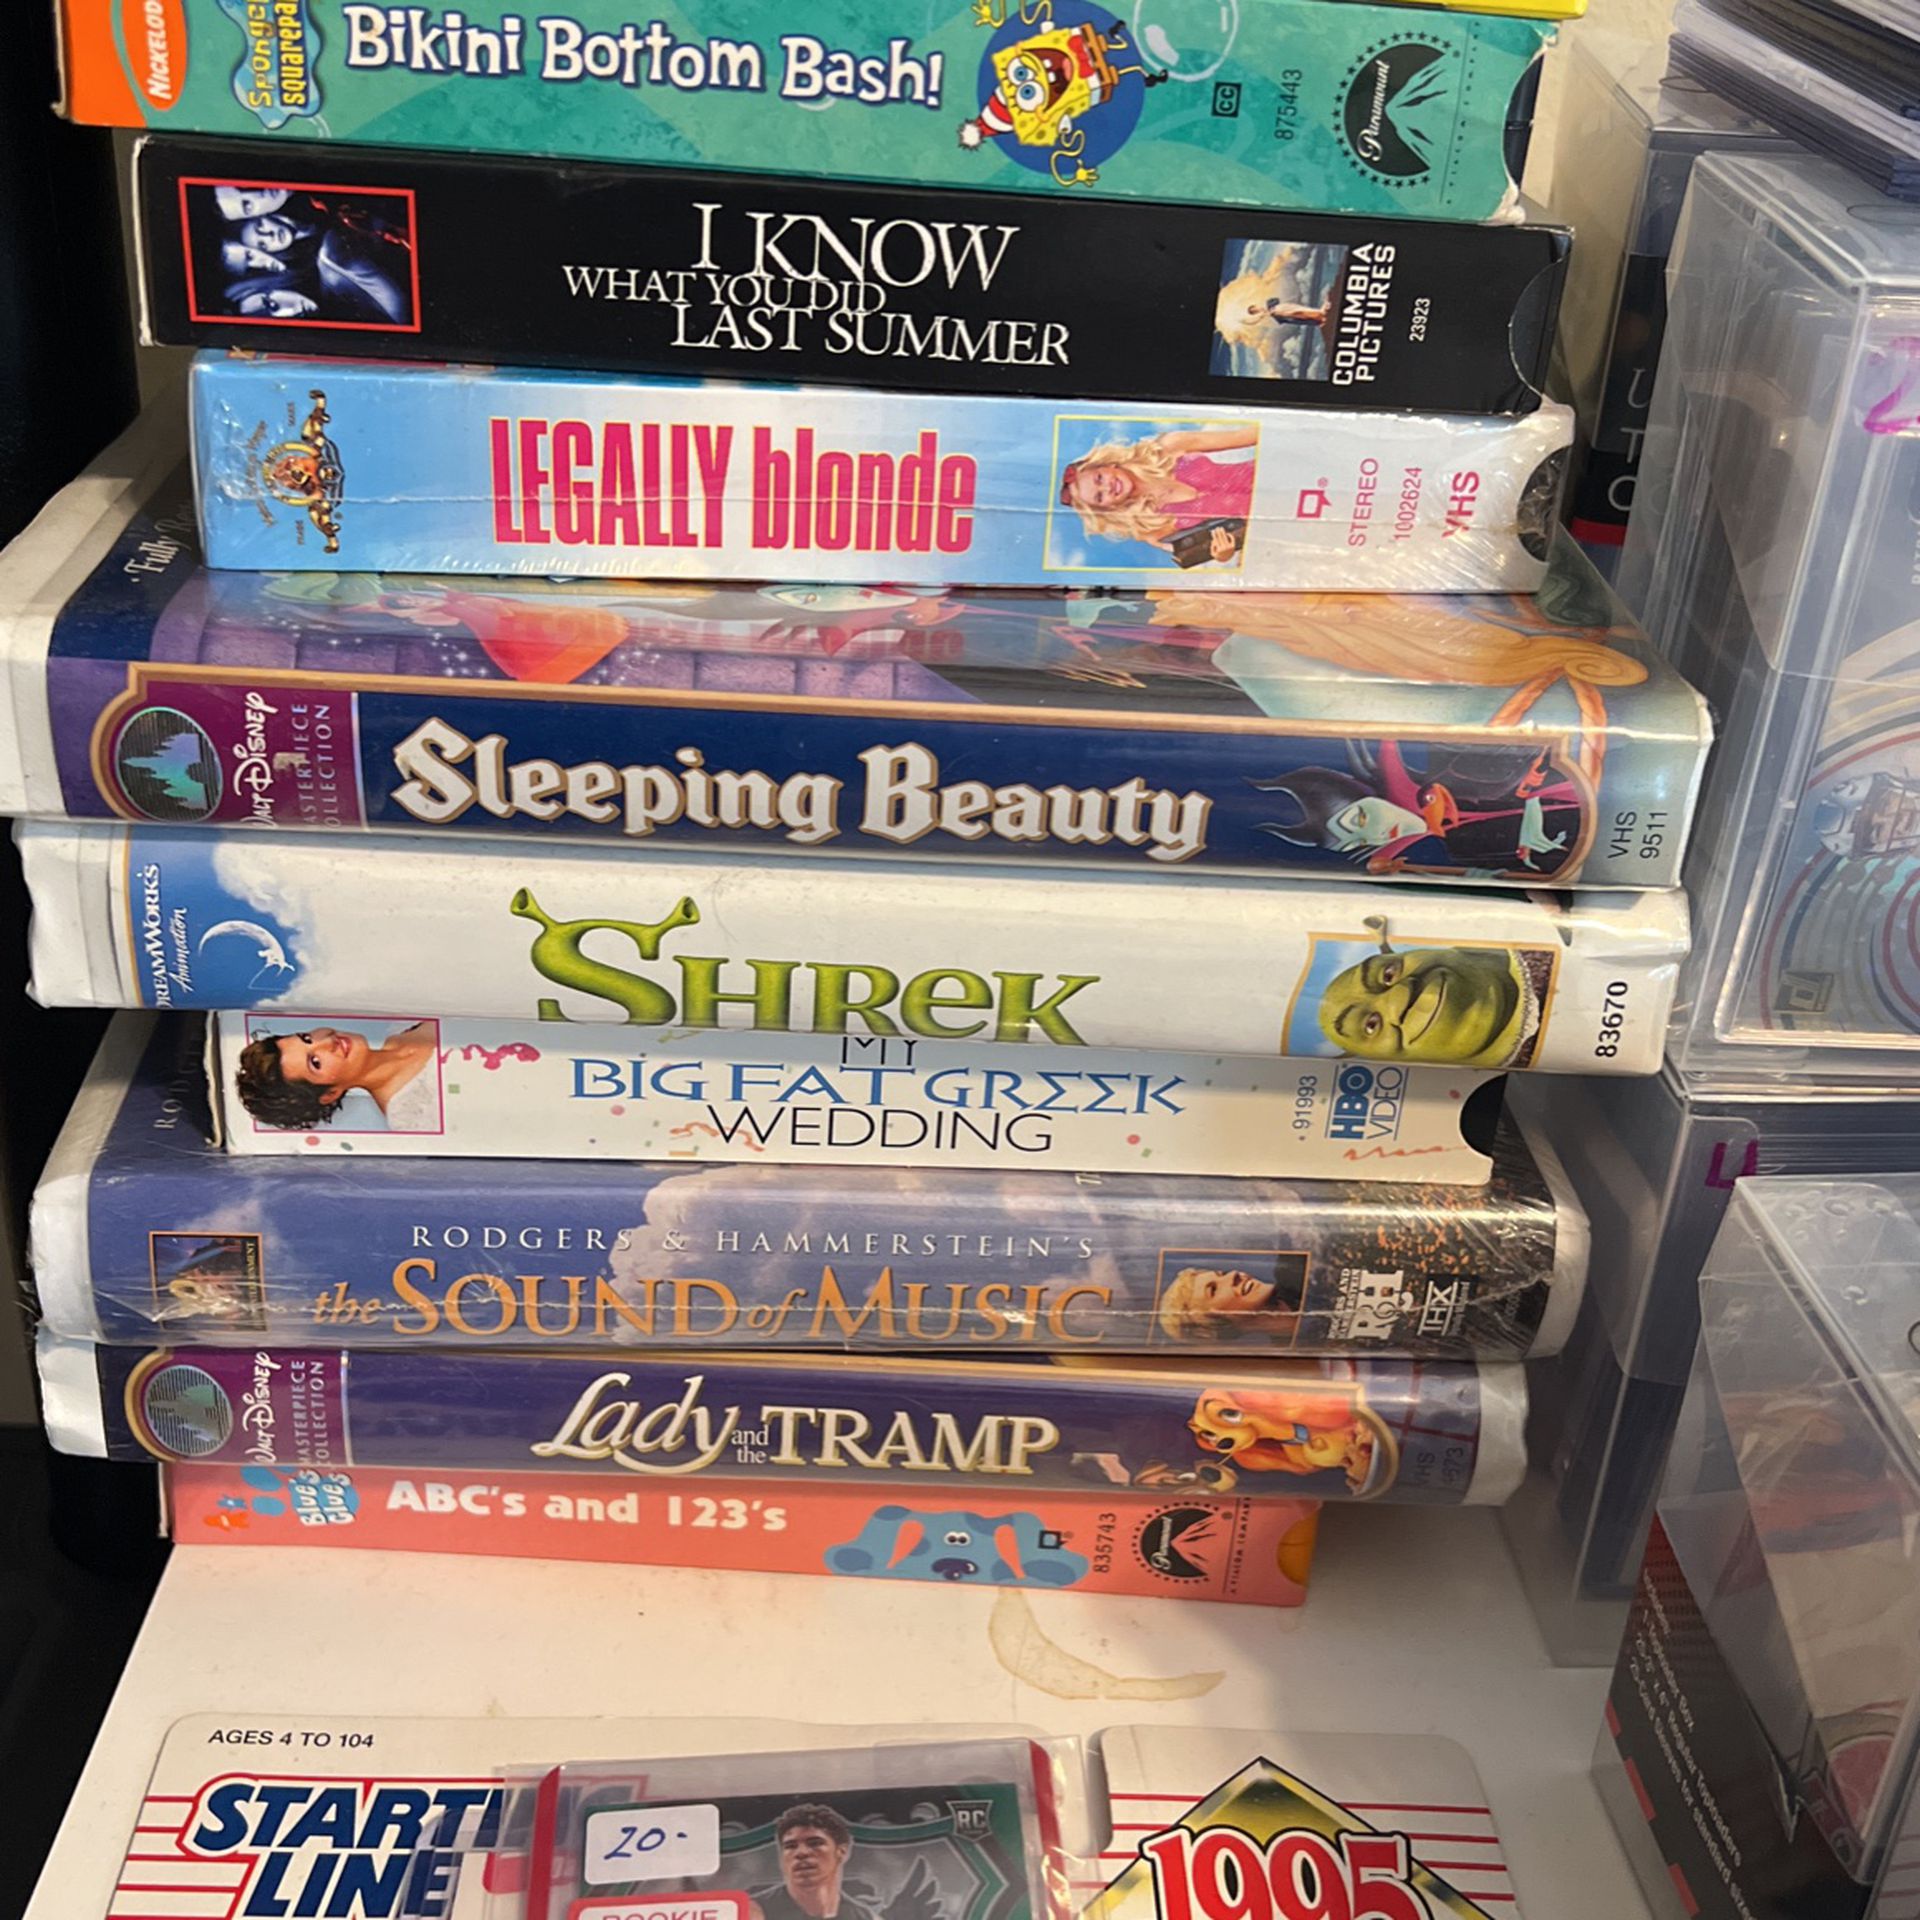 13 Vhs!!! Full metal jacket Italian Job legally blonde Shrek sound of music Lady and the tramp blues clues